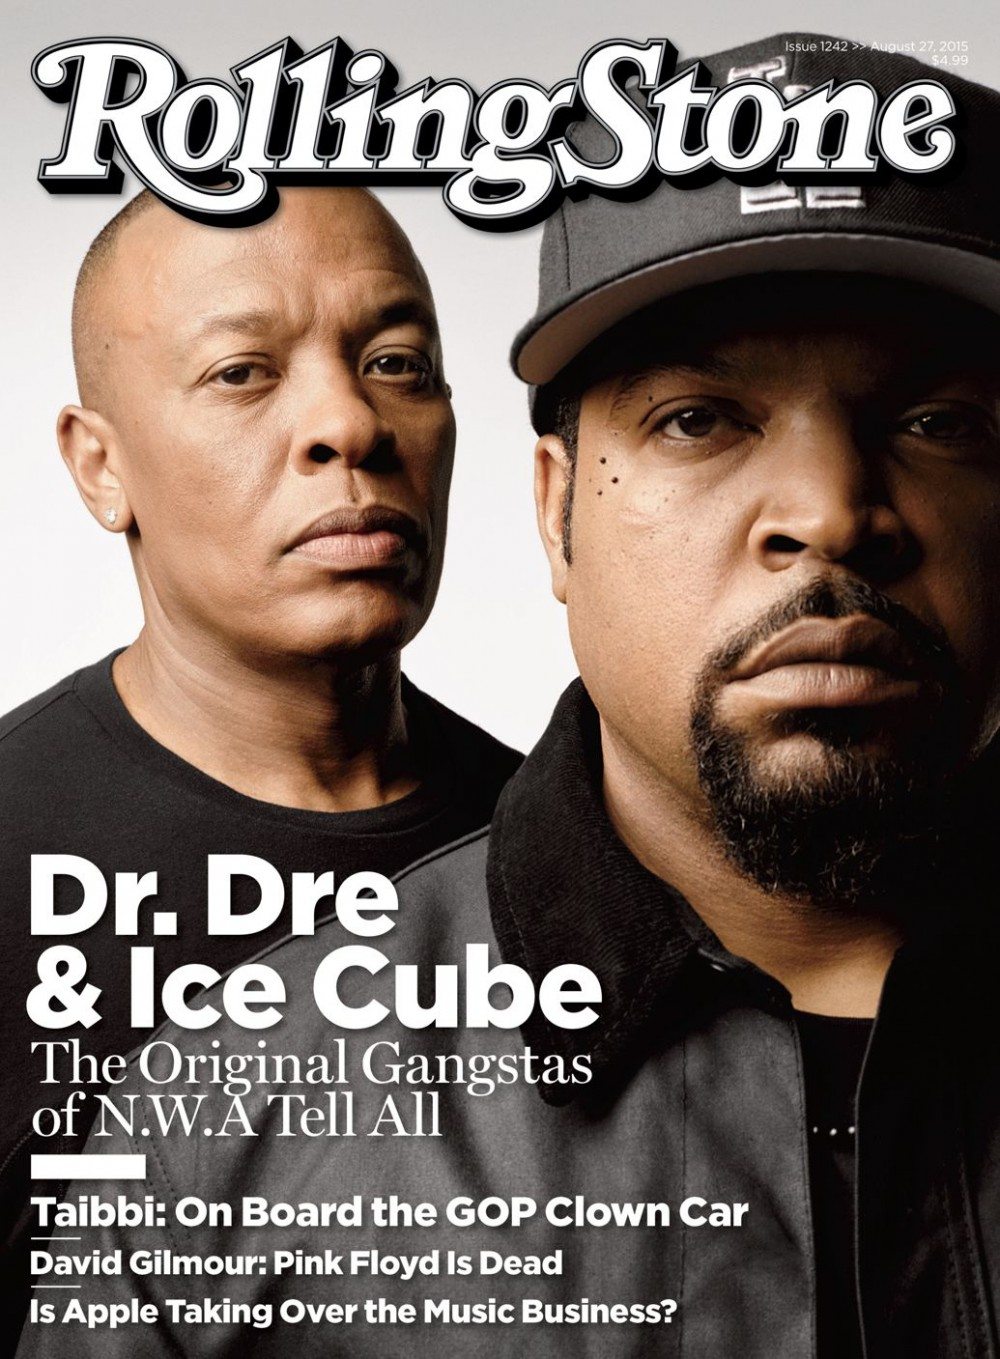 Dr. Dre & Ice Cube Rolling Stone